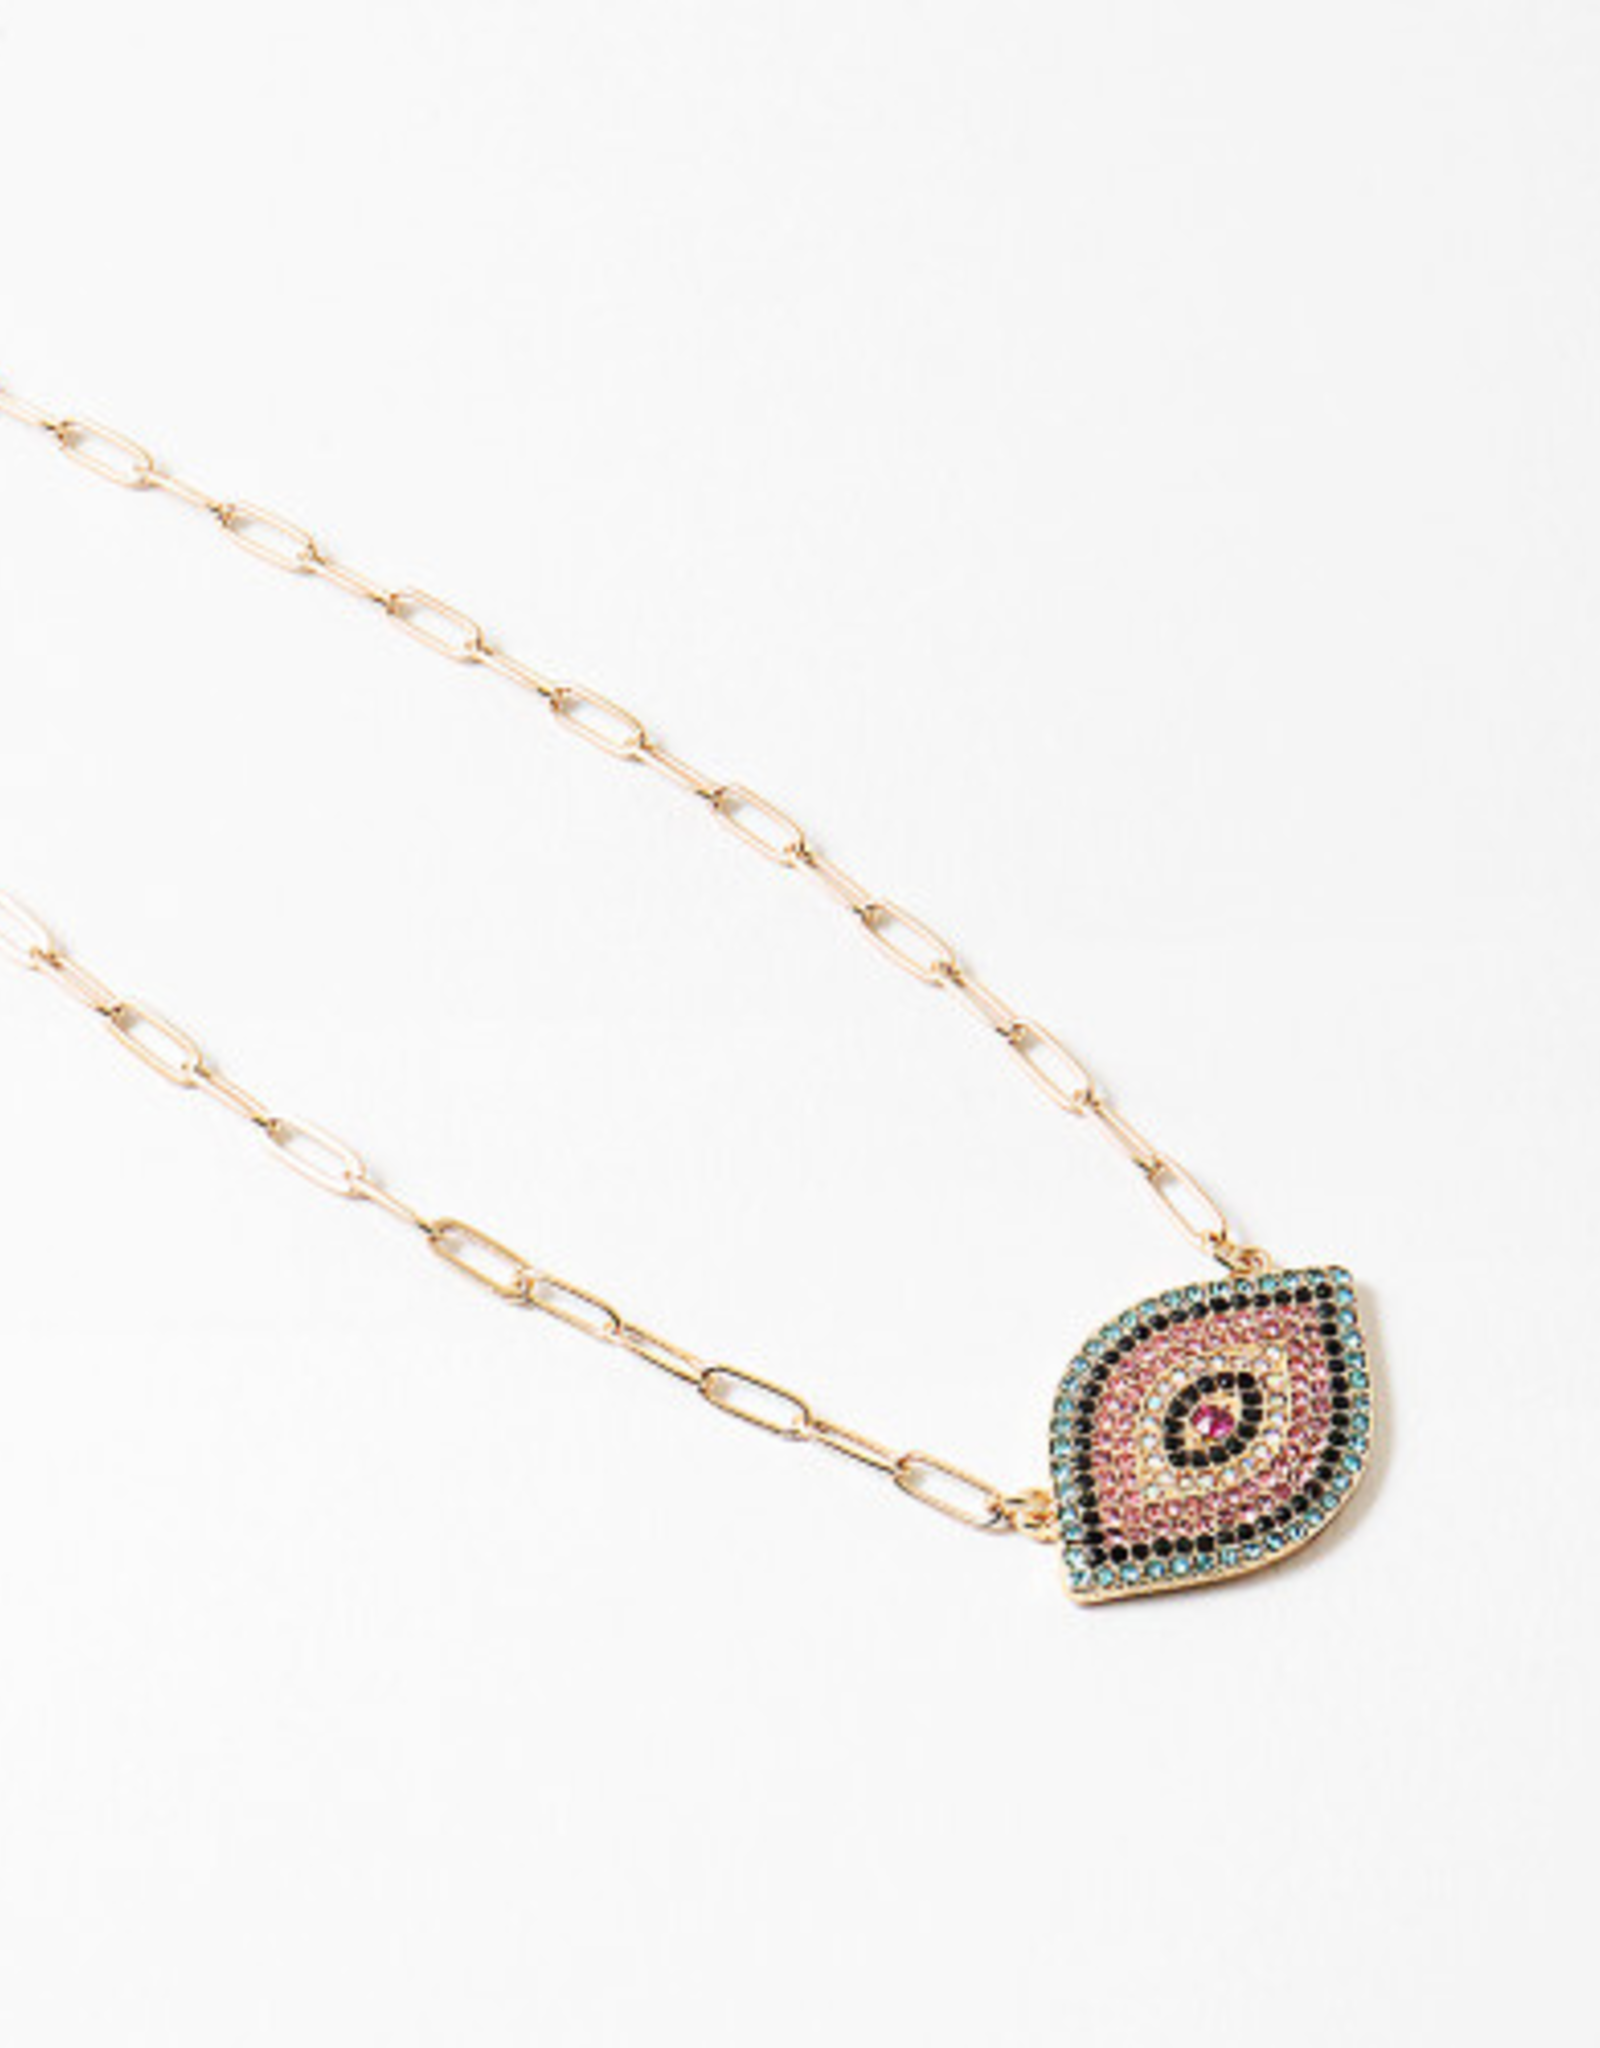 Evil Eye Necklace Rainbow Rose Gold Pated Pendant 17.5 Inches Chain 